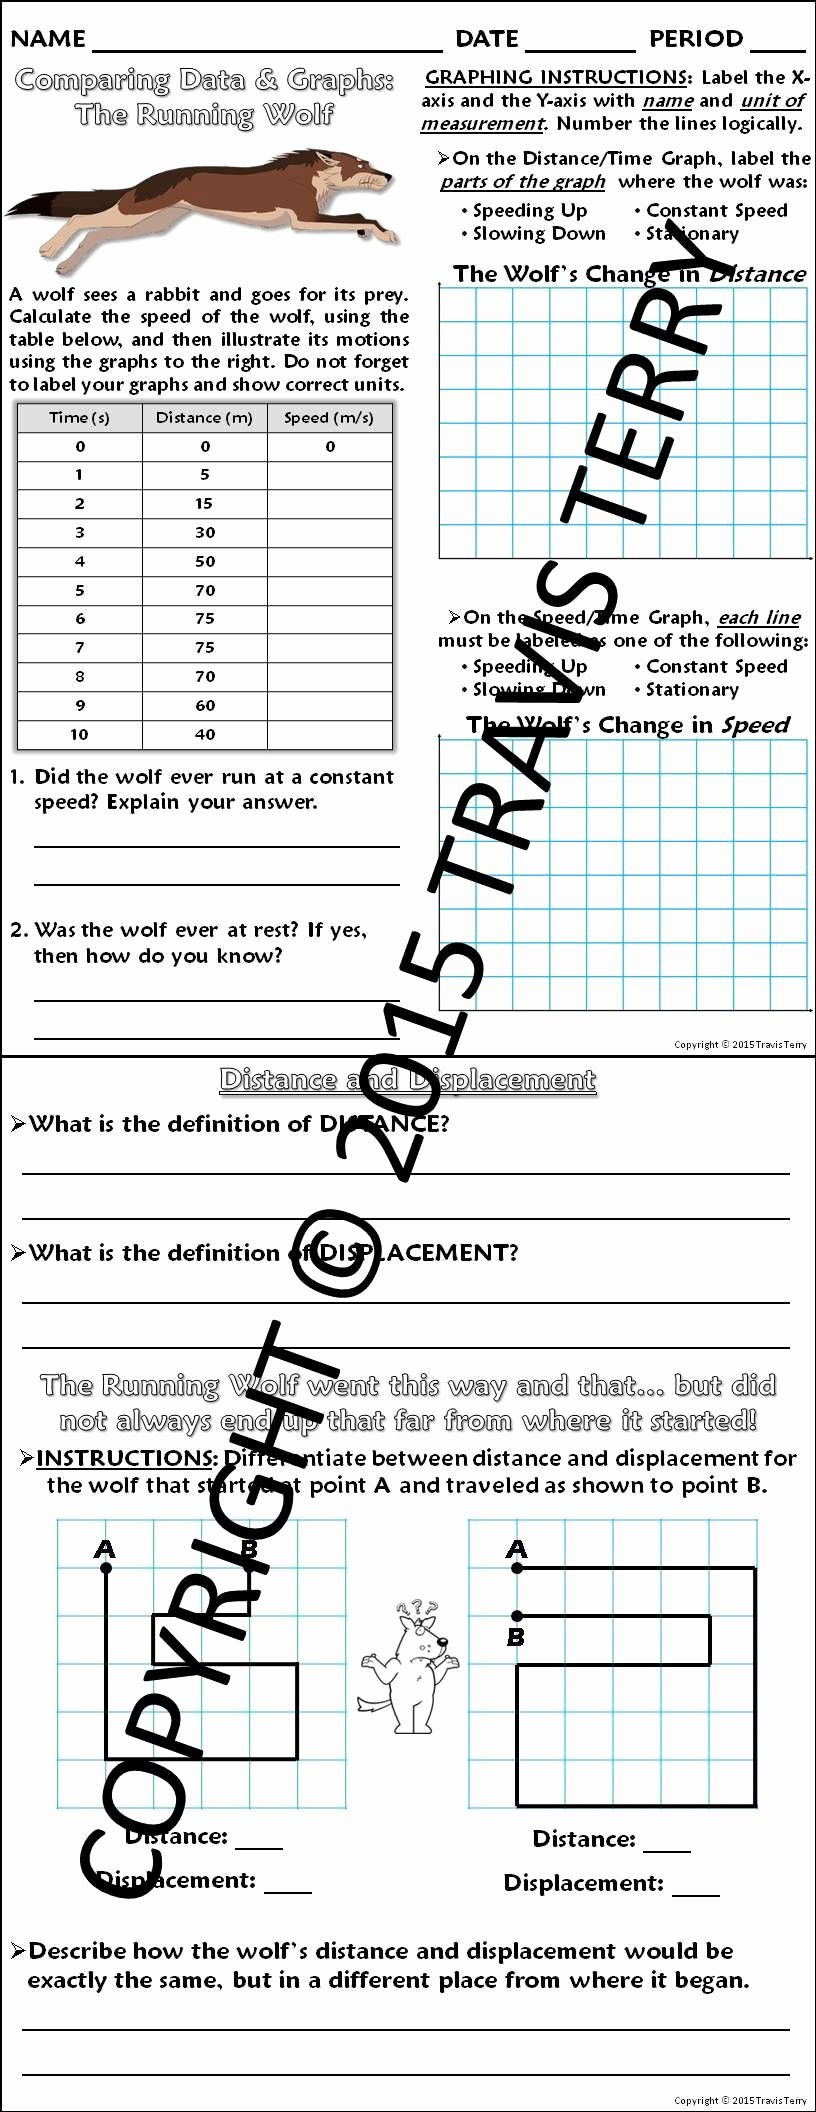 Distance and Displacement Worksheet Unique Worksheet Graphing Distance and Displacement W the